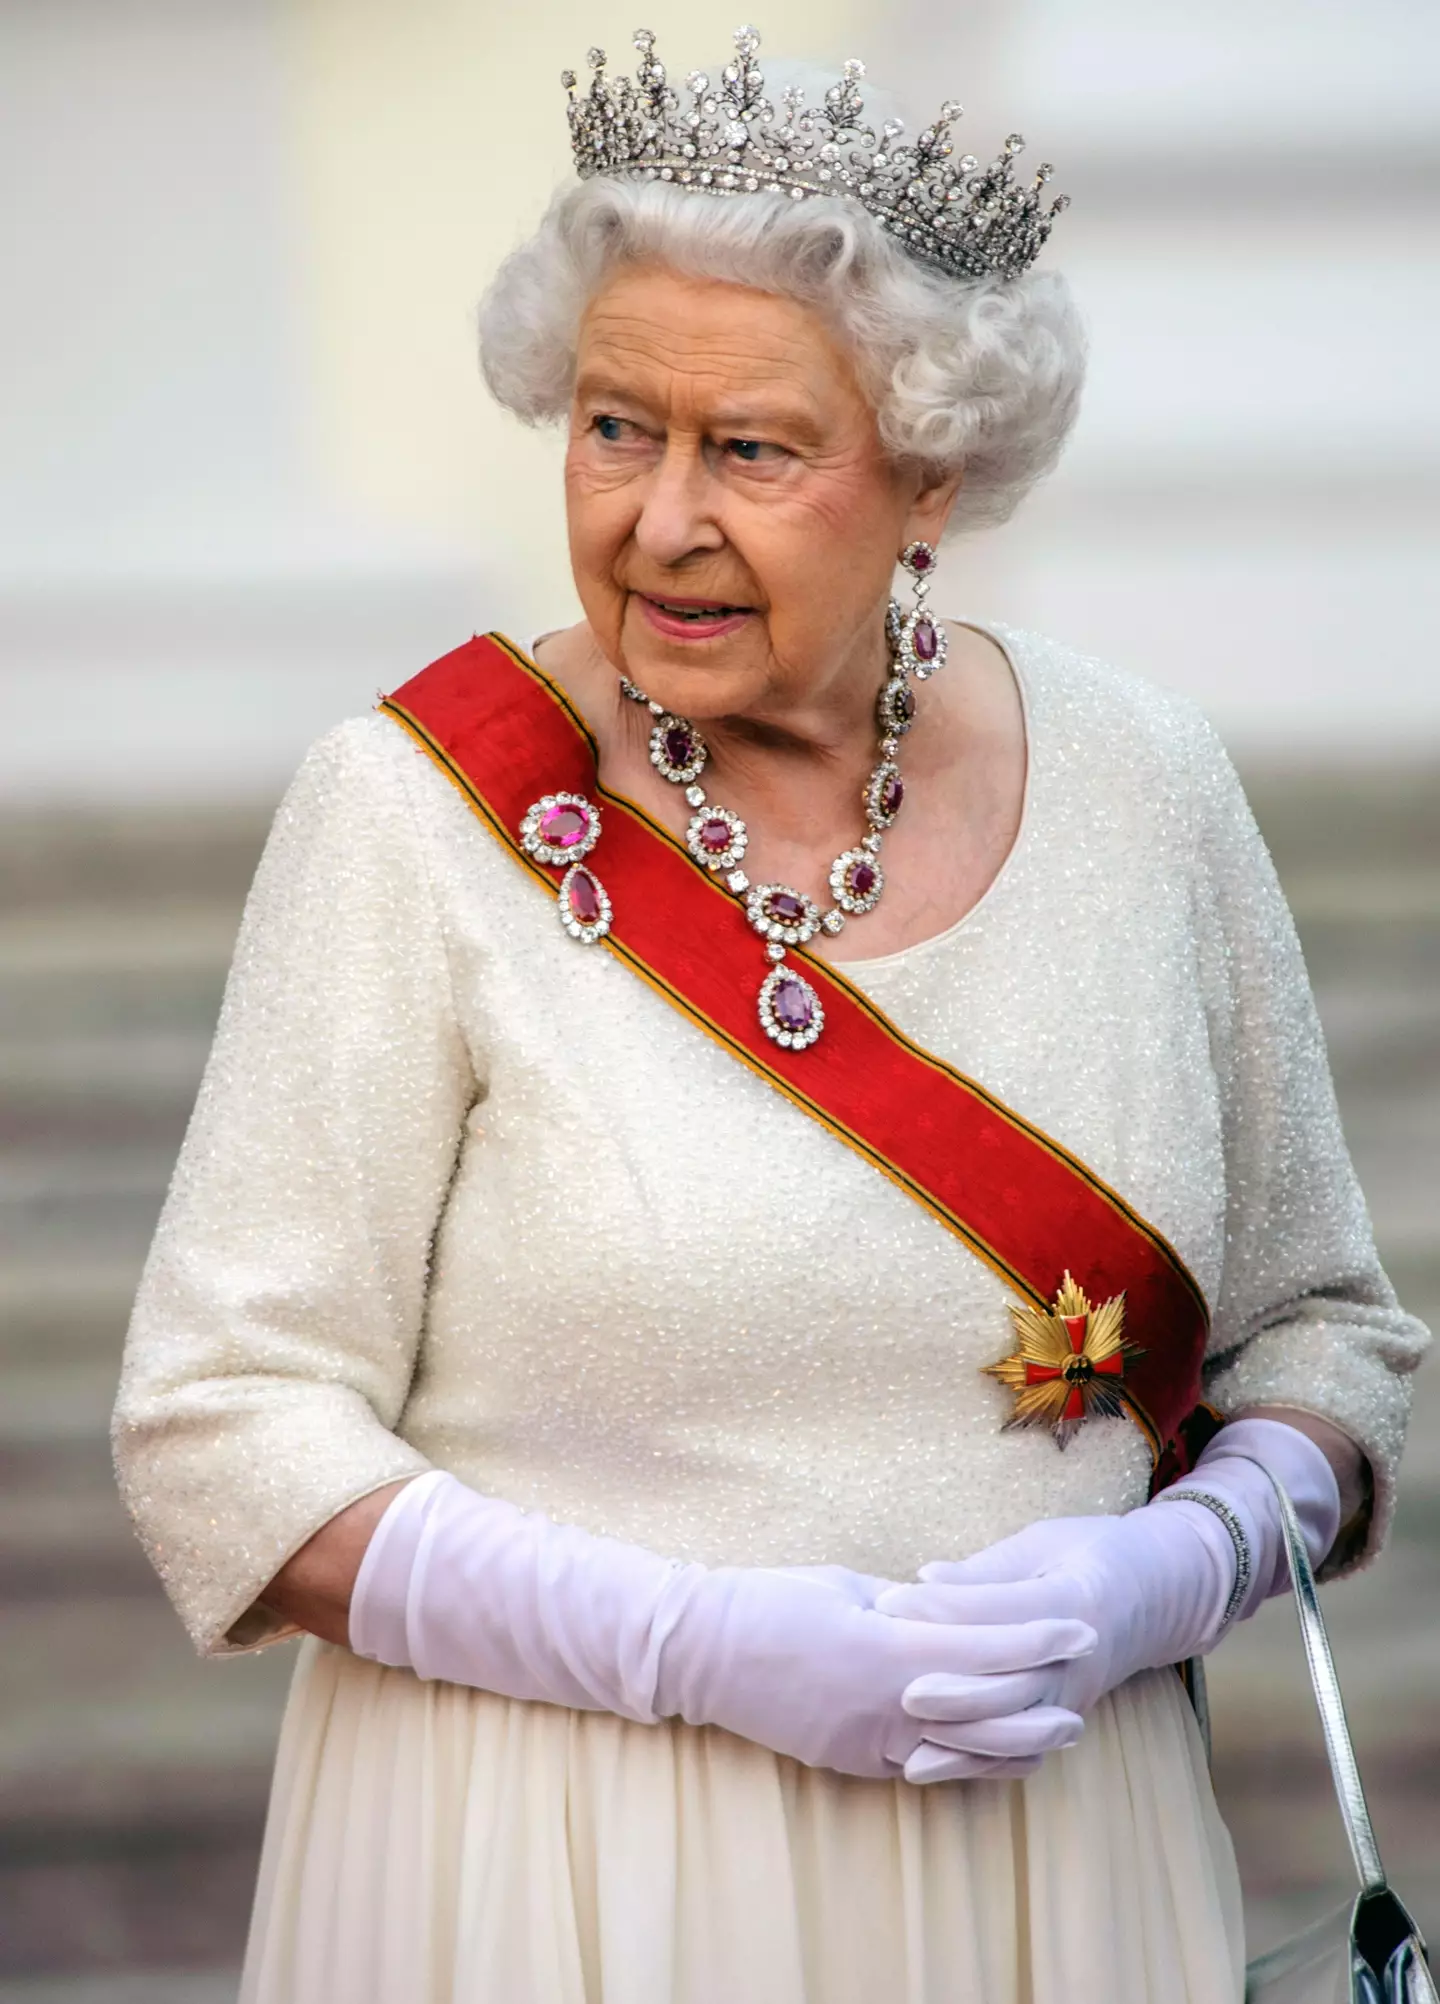 Dr Uju Anya has said the Queen was part of a ‘cult of white womanhood’ days after the monarch's death.